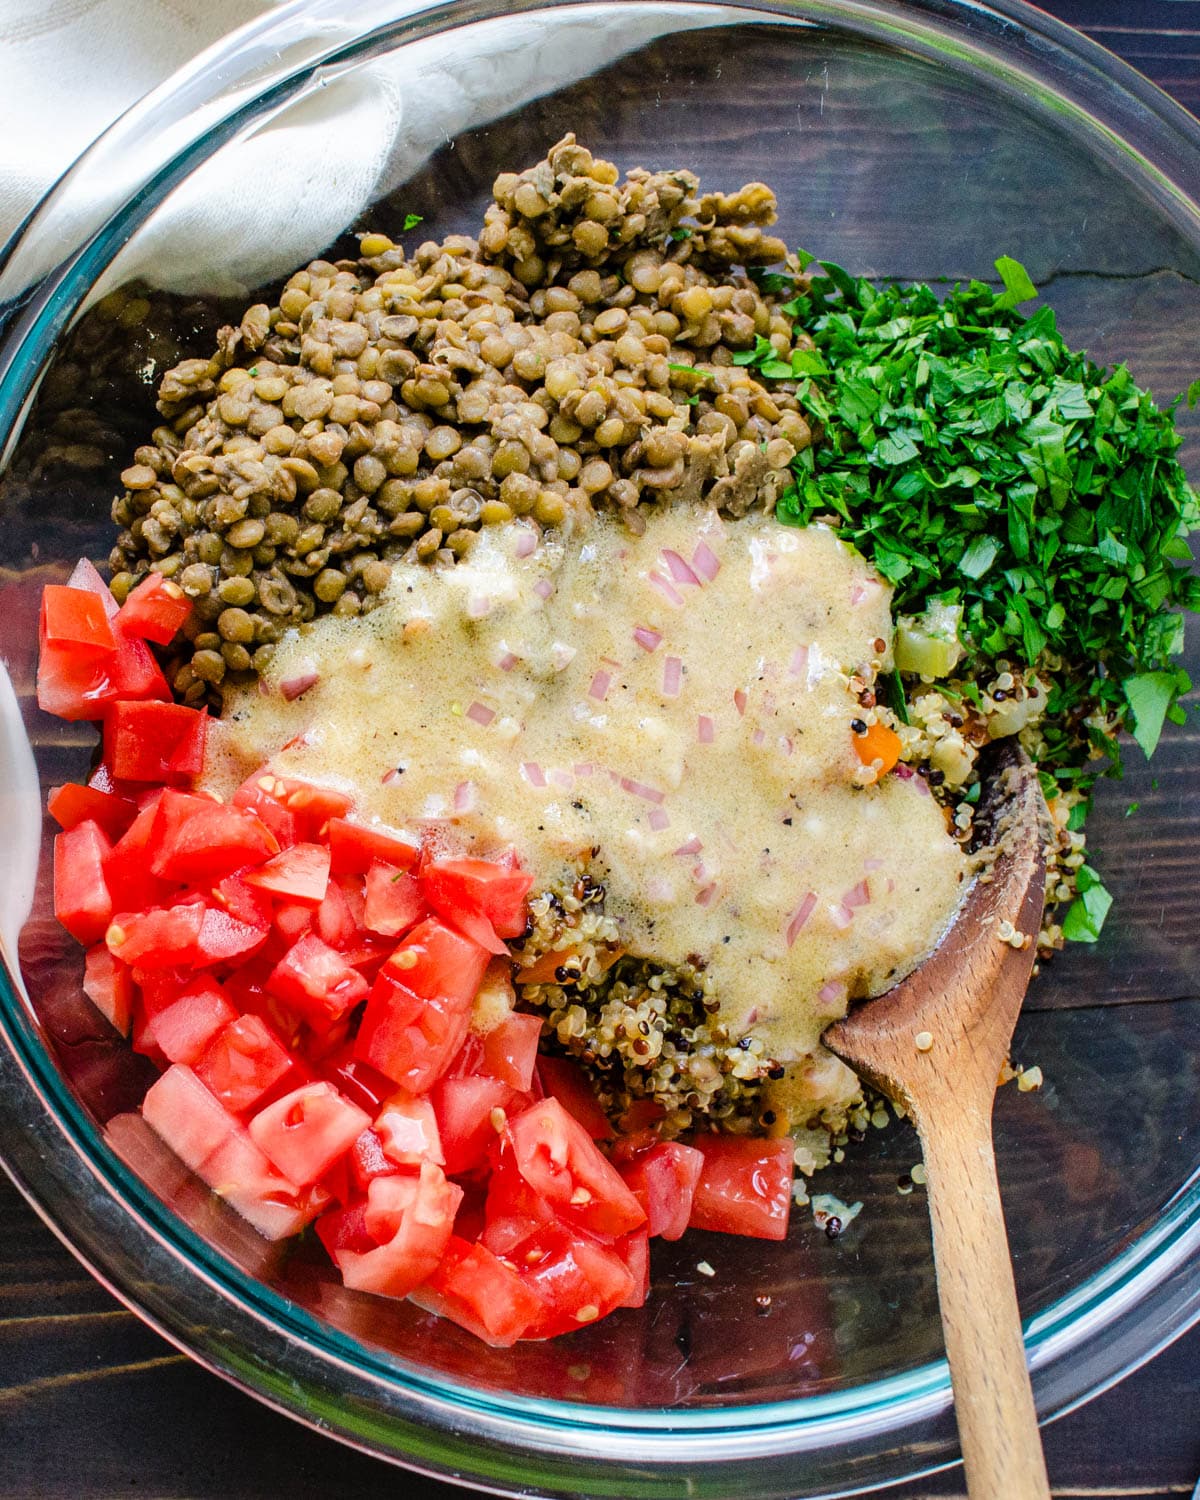 Combining the lentils, diced tomatoes, and quinoa in a bowl.